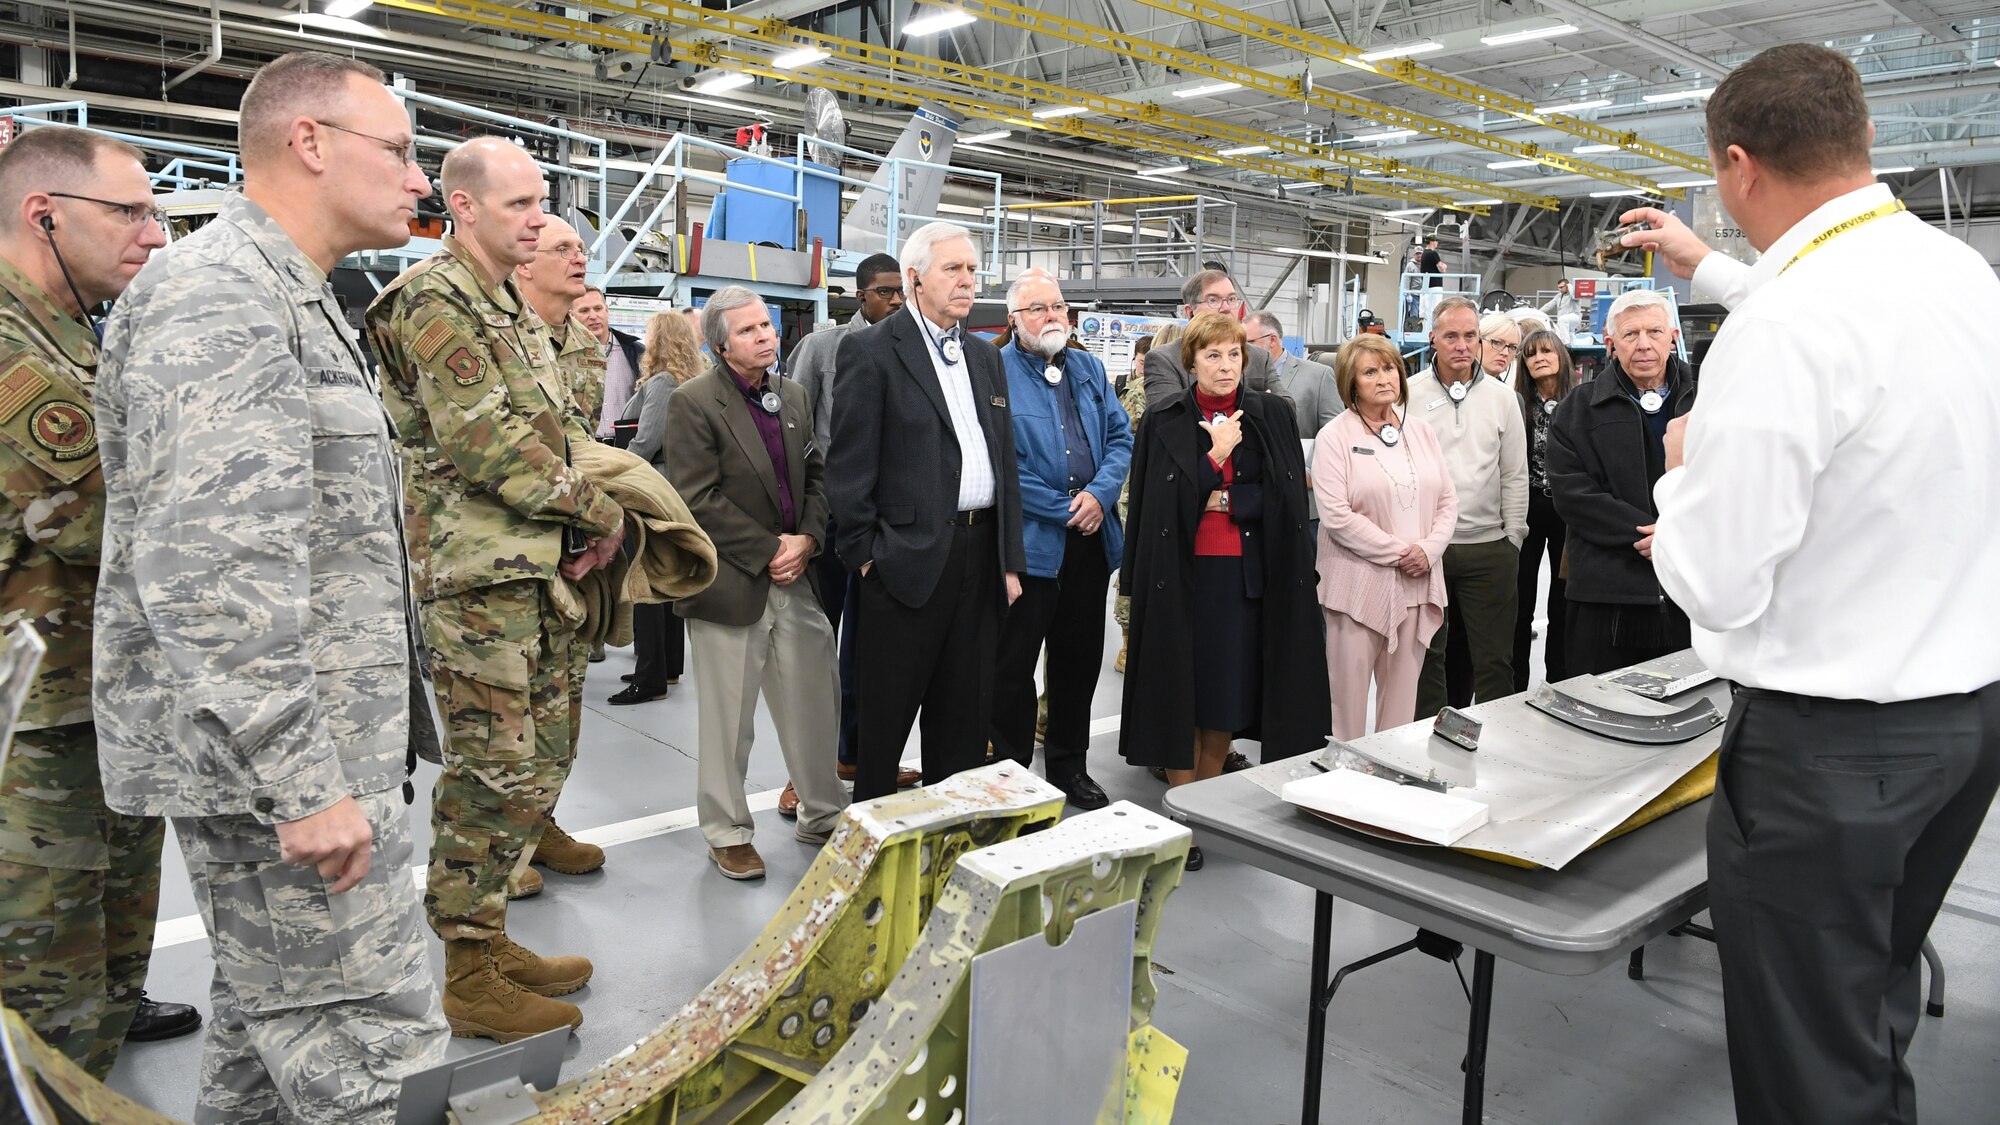 Community leaders from around the country tour the Ogden Air Logistics Complex during a base visit Oct. 21, 2019, at Hill Air Force Base, Utah. The group visited Hill as part of Air Force Materiel Command’s Civic Leader Program. The CLP members meet twice annually to hear updates on AFMC and Air Force issues. (U.S. Air Force photo by Cynthia Griggs)